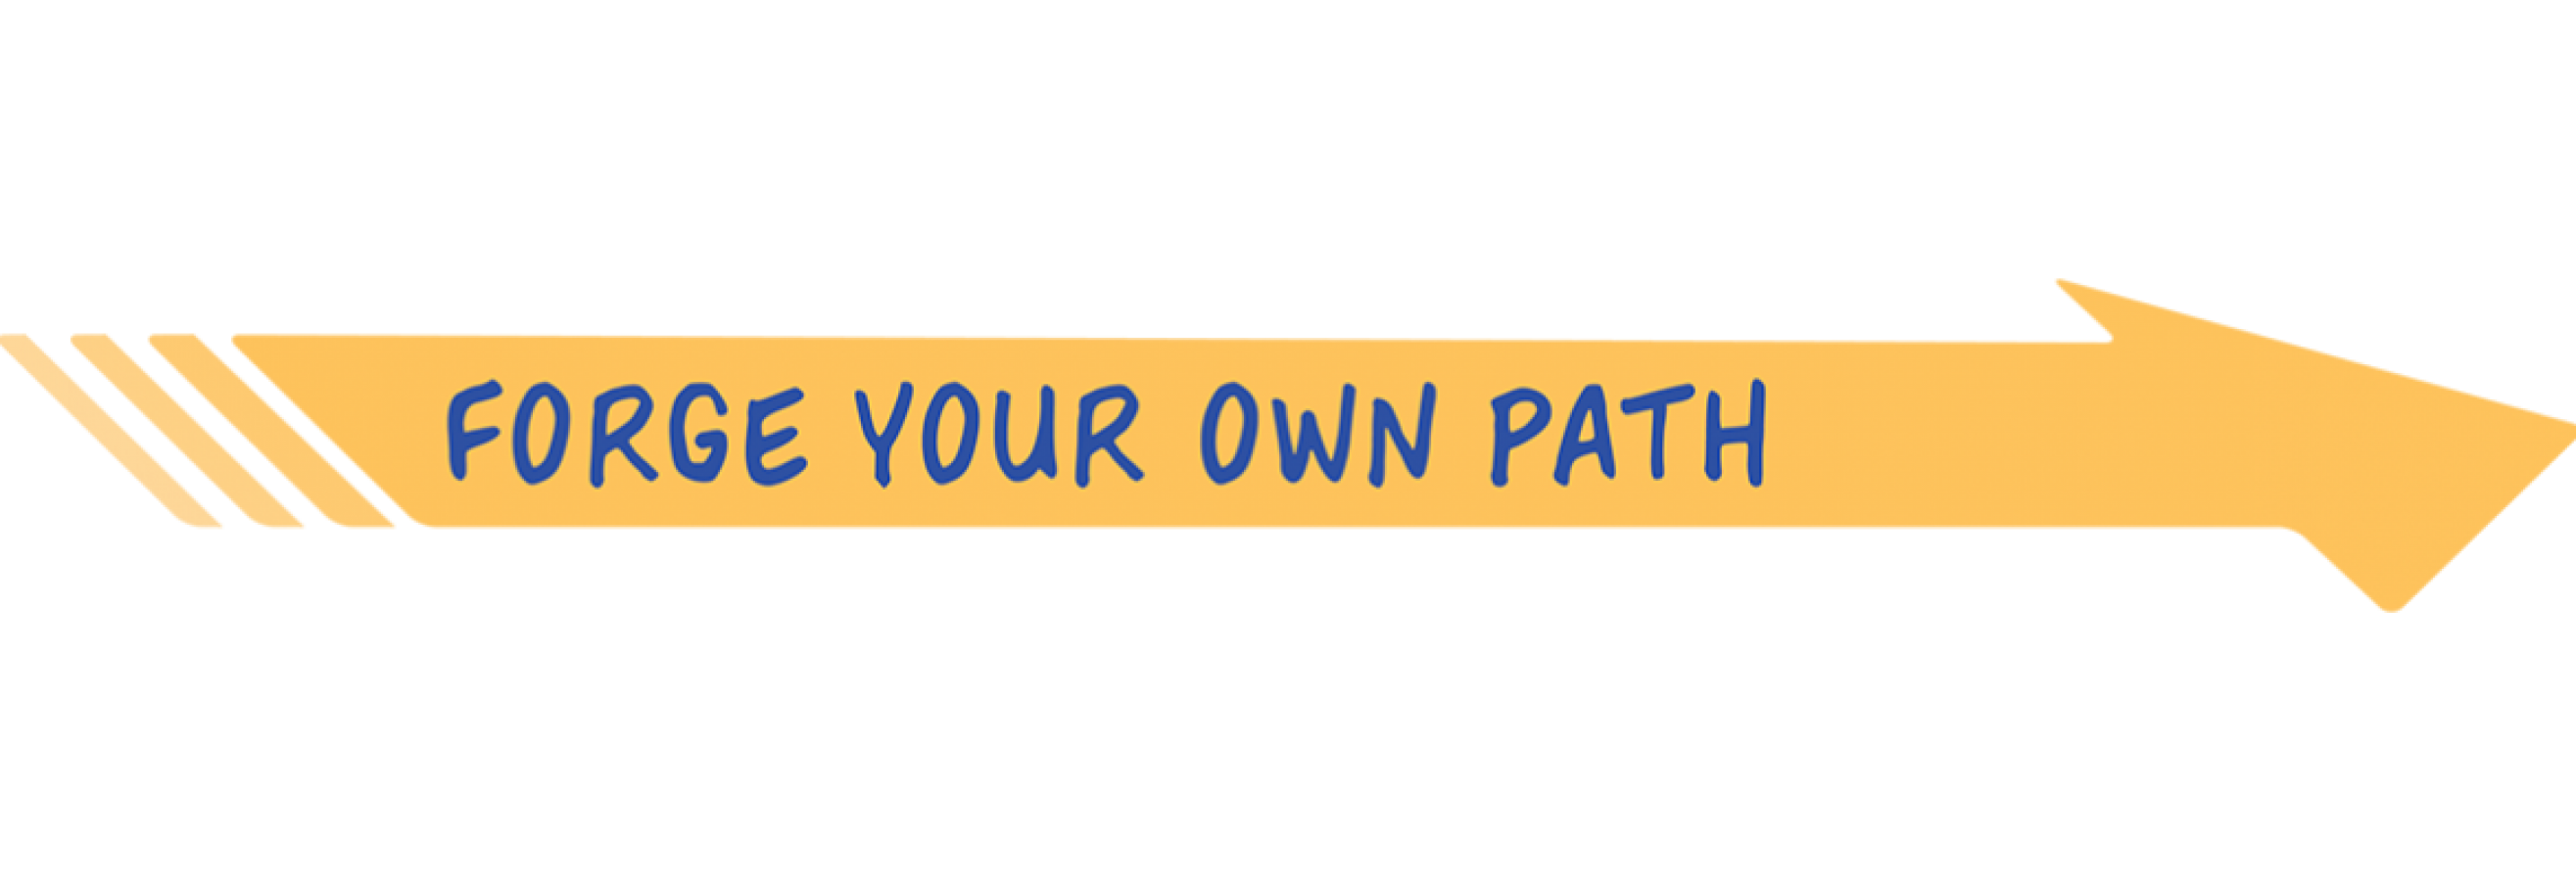 Forge Your Own Path text on yellow arrow pointing to the right